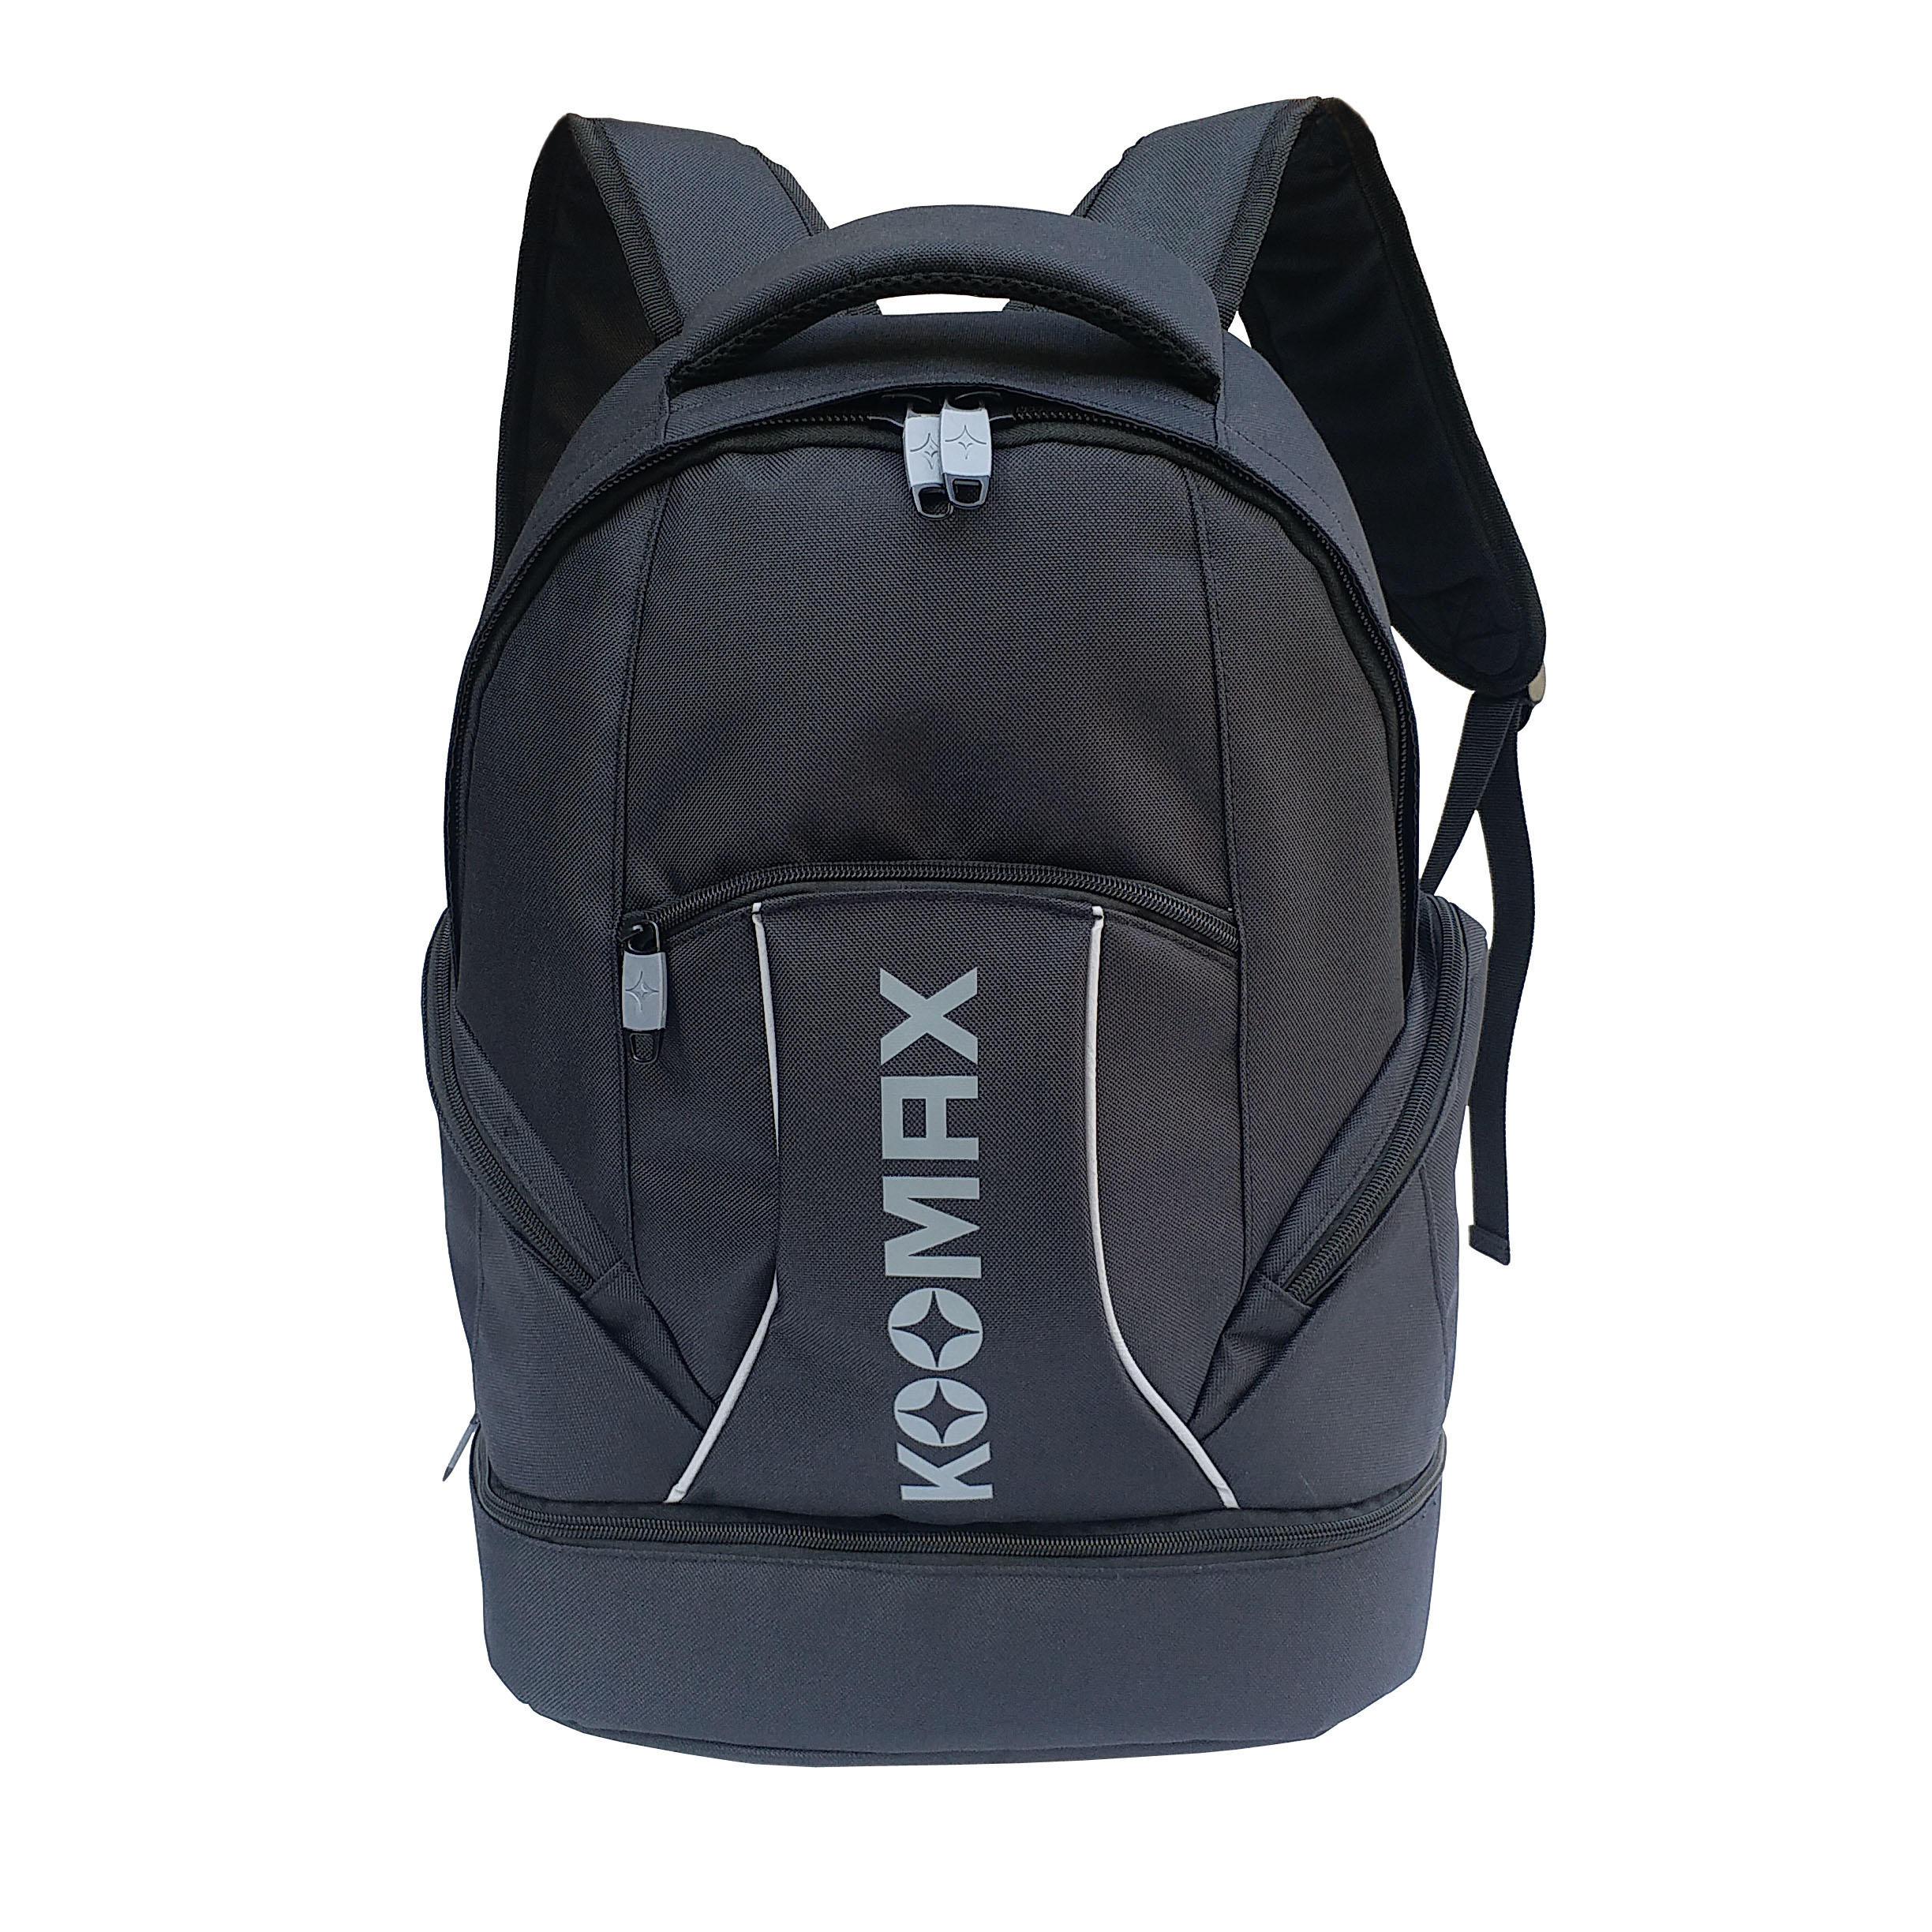 Outdoor Sports Backpack Bag With Shoes Compartment